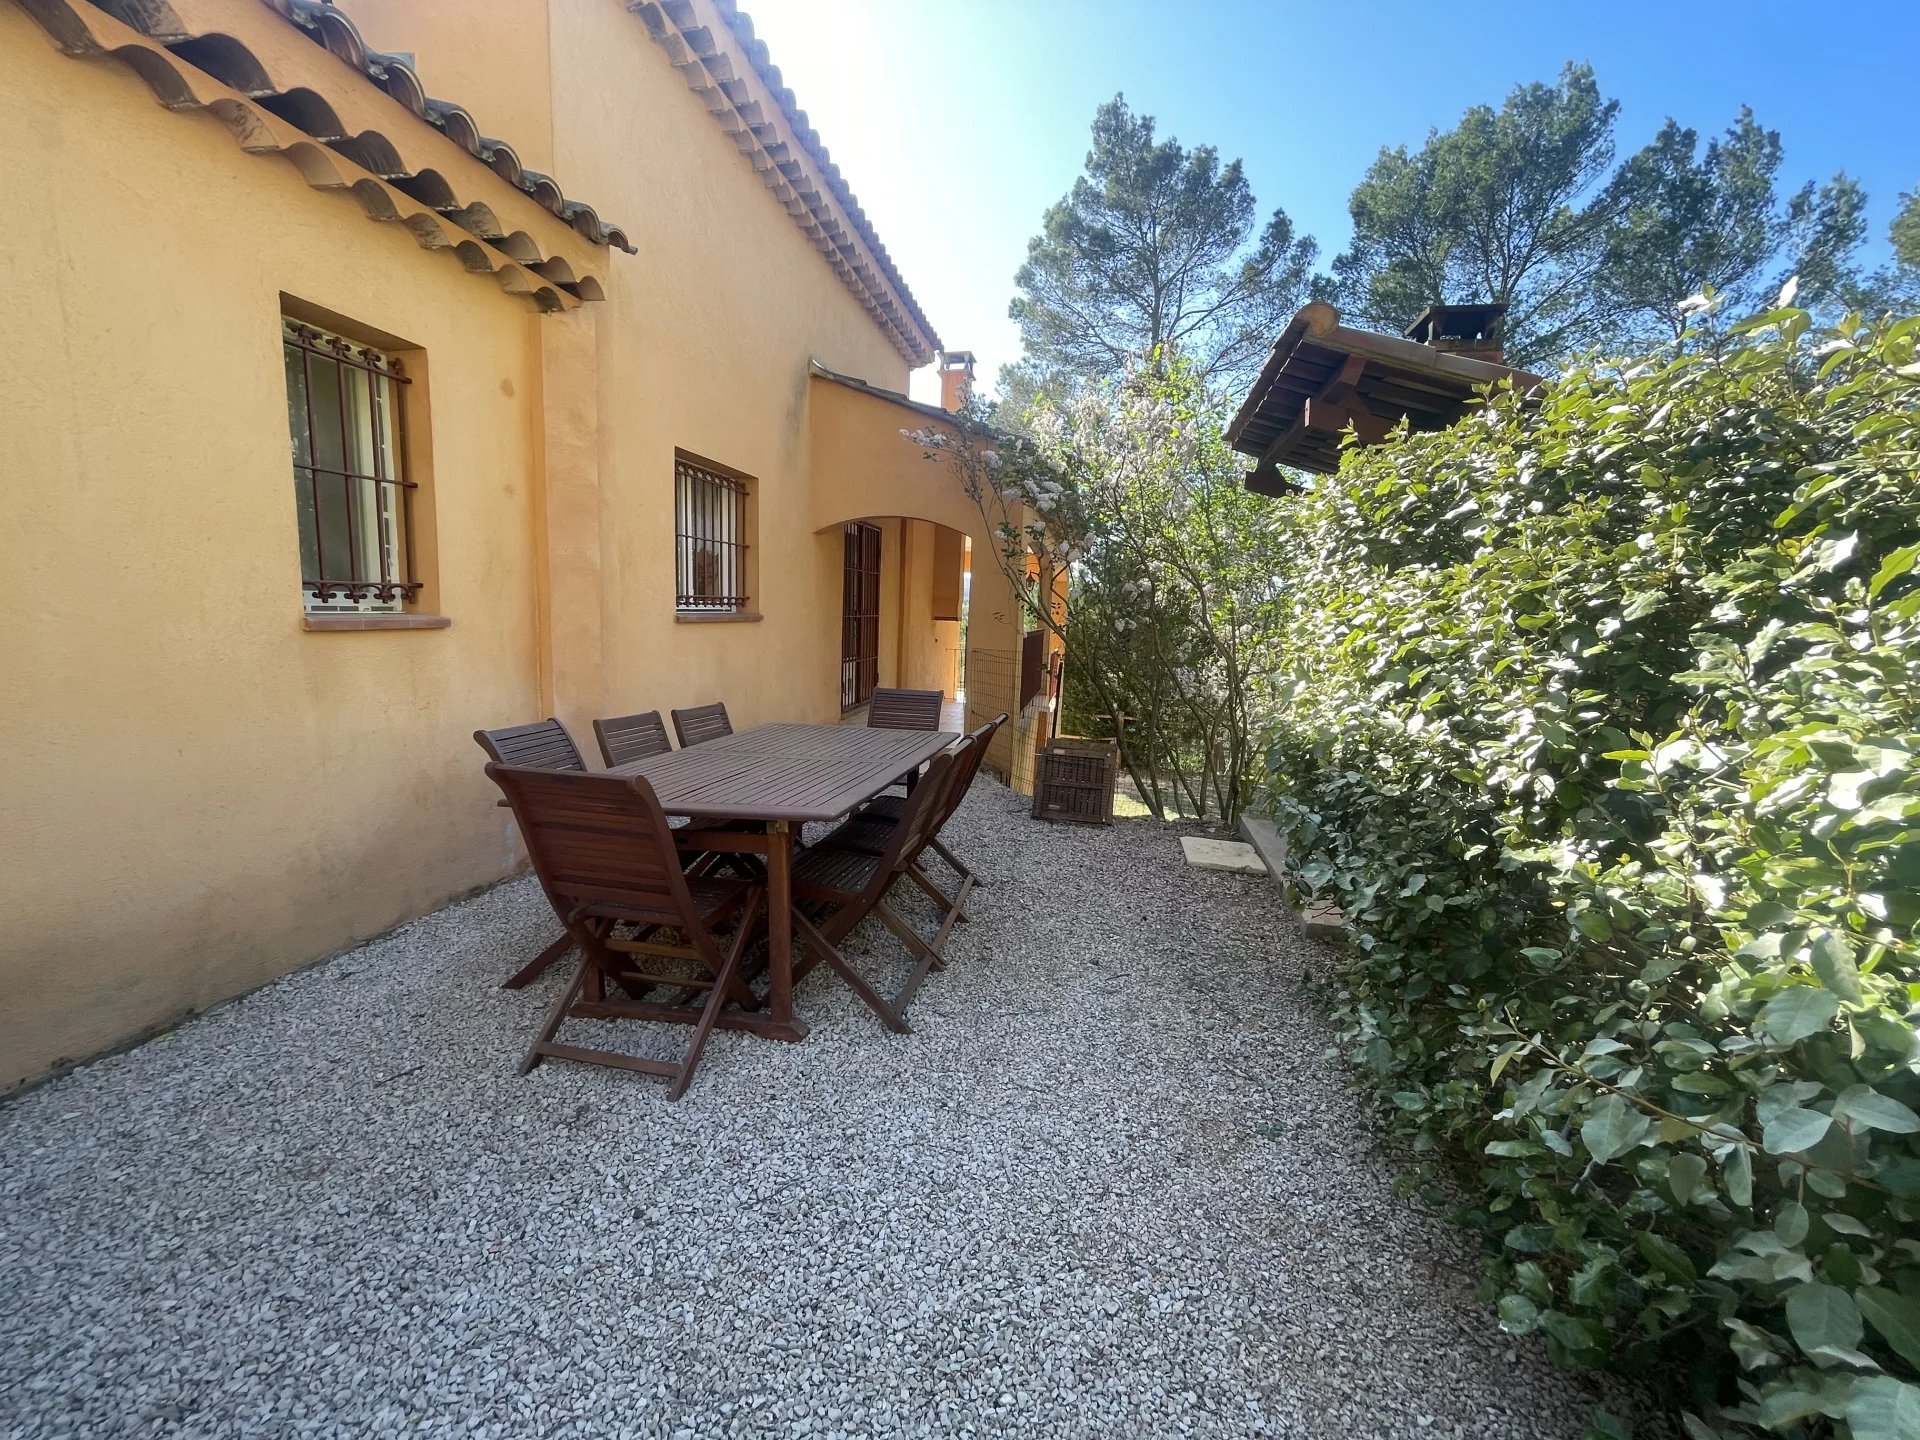 BARJOLS - 6-bedroom house with pool, separate guest house, on 8052 m² of preserved land, panoramic view